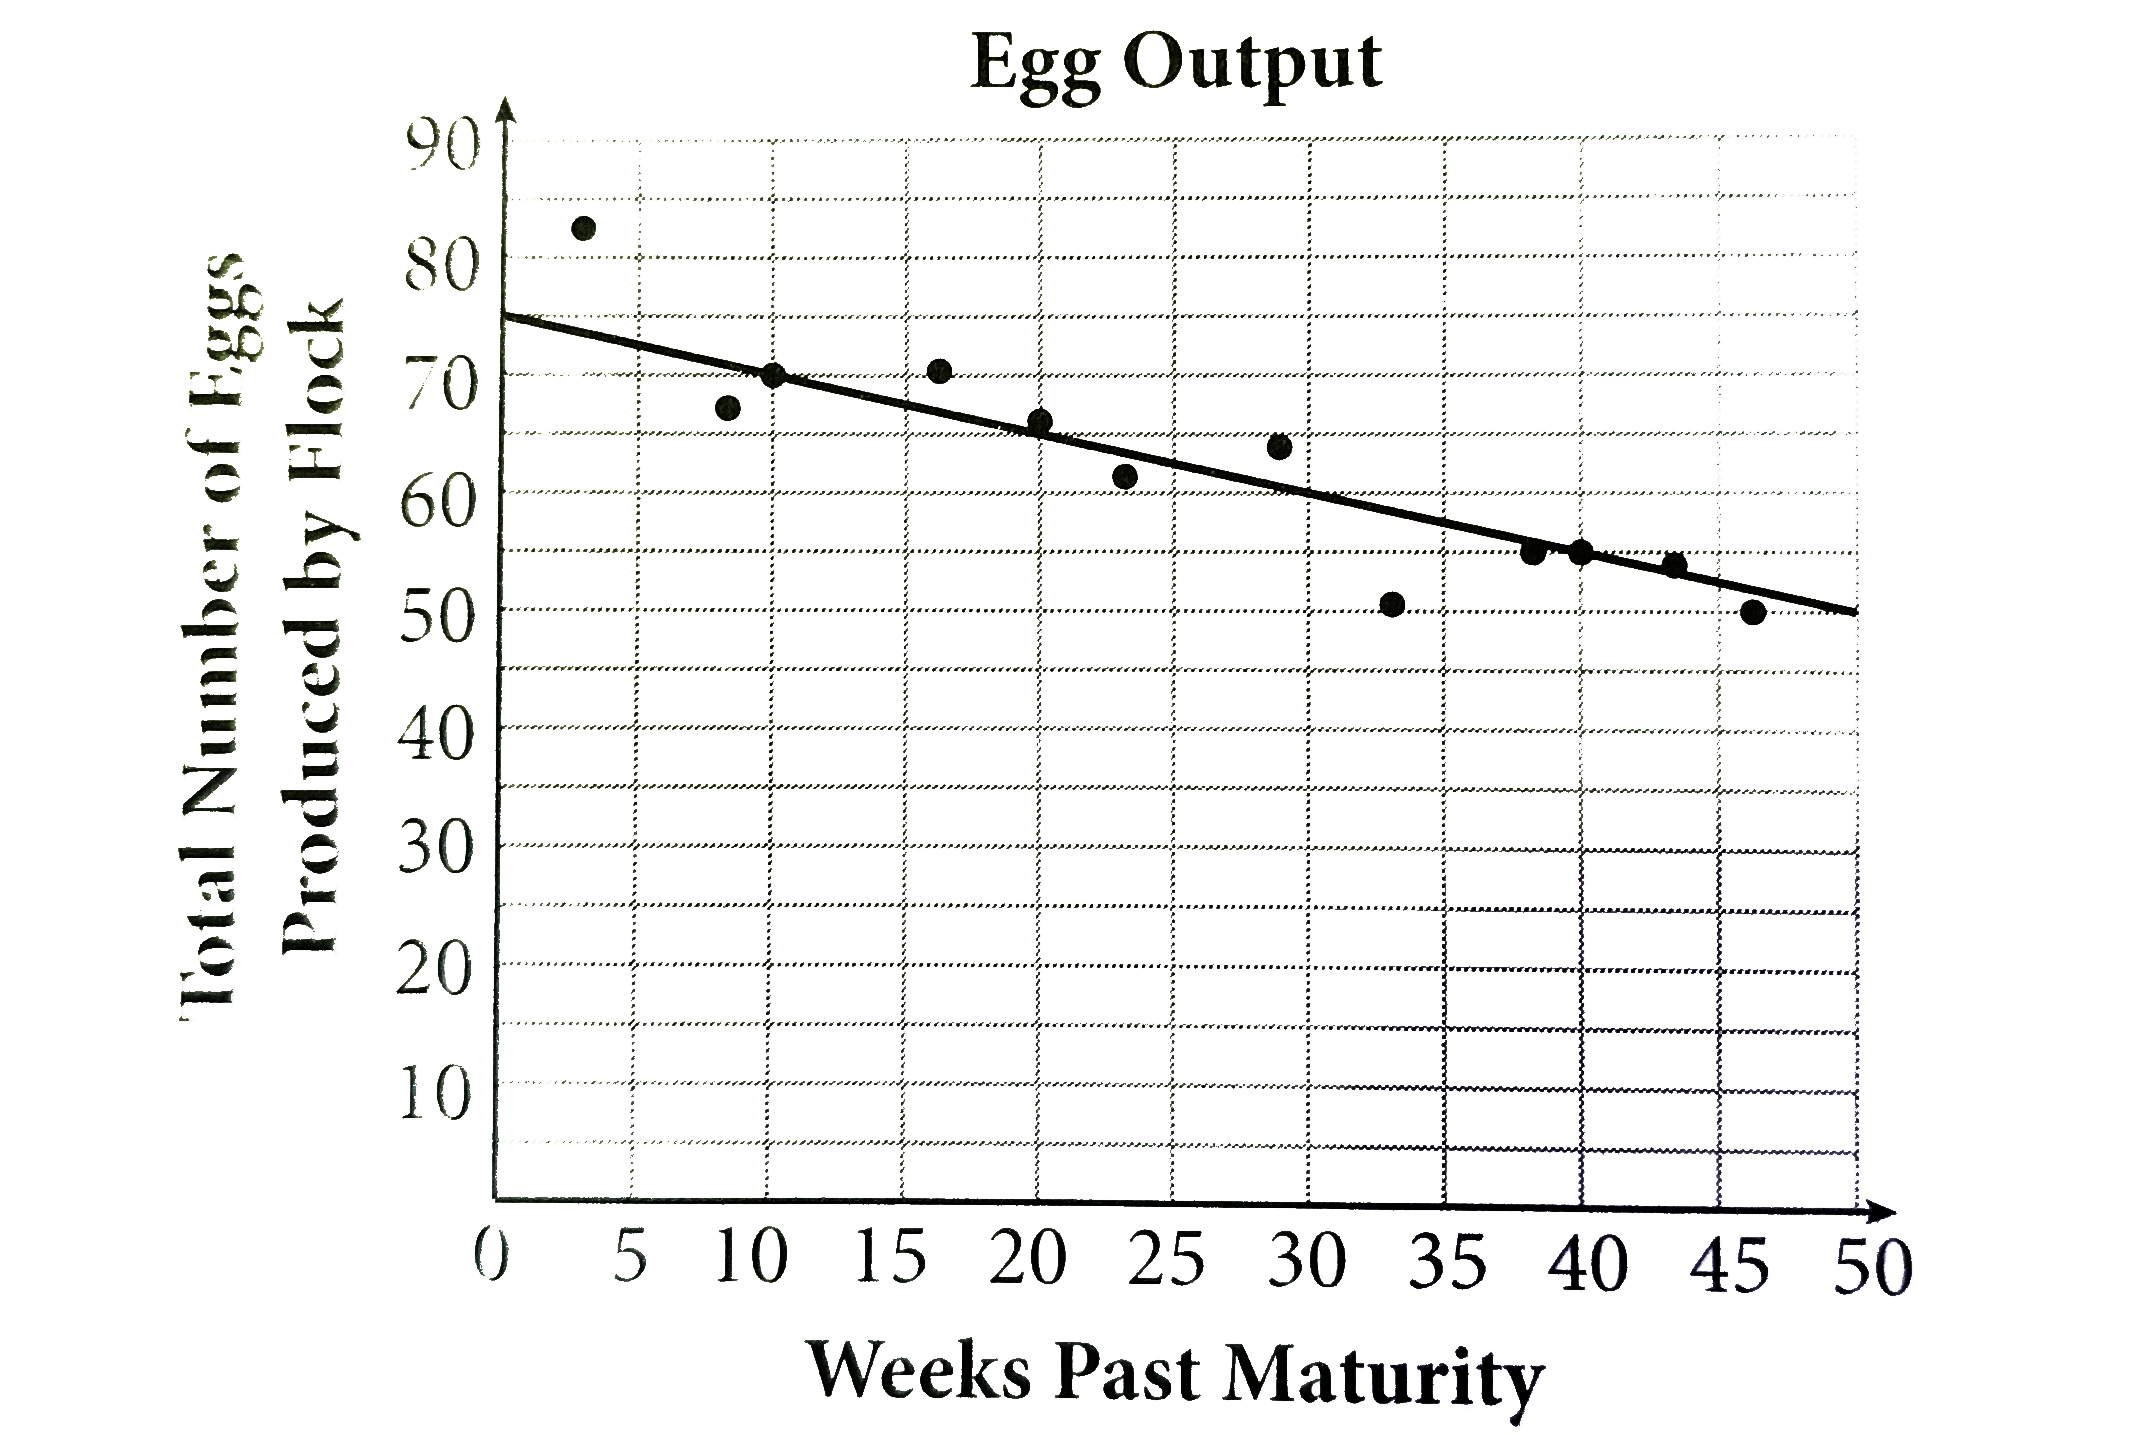 Most chickens reach maturity and begin laying eggs at around 20 weeks of age. From this point forward, however, as the chicken ages,its eges its egg production decreases. A farmer was given a flock of 100 chickens (all of which were the same age) and asked to meaure daily egg output for the entire flock at random intervals starting at maturity until the chickens were 70 weeks old. The data are recorded  in the scatteplot below and the line of best fit has been drawn.       Based on the line of bast fit, what is the predicted number of eggs that will be produced by the flock when it is 33 weeks past maturity ?